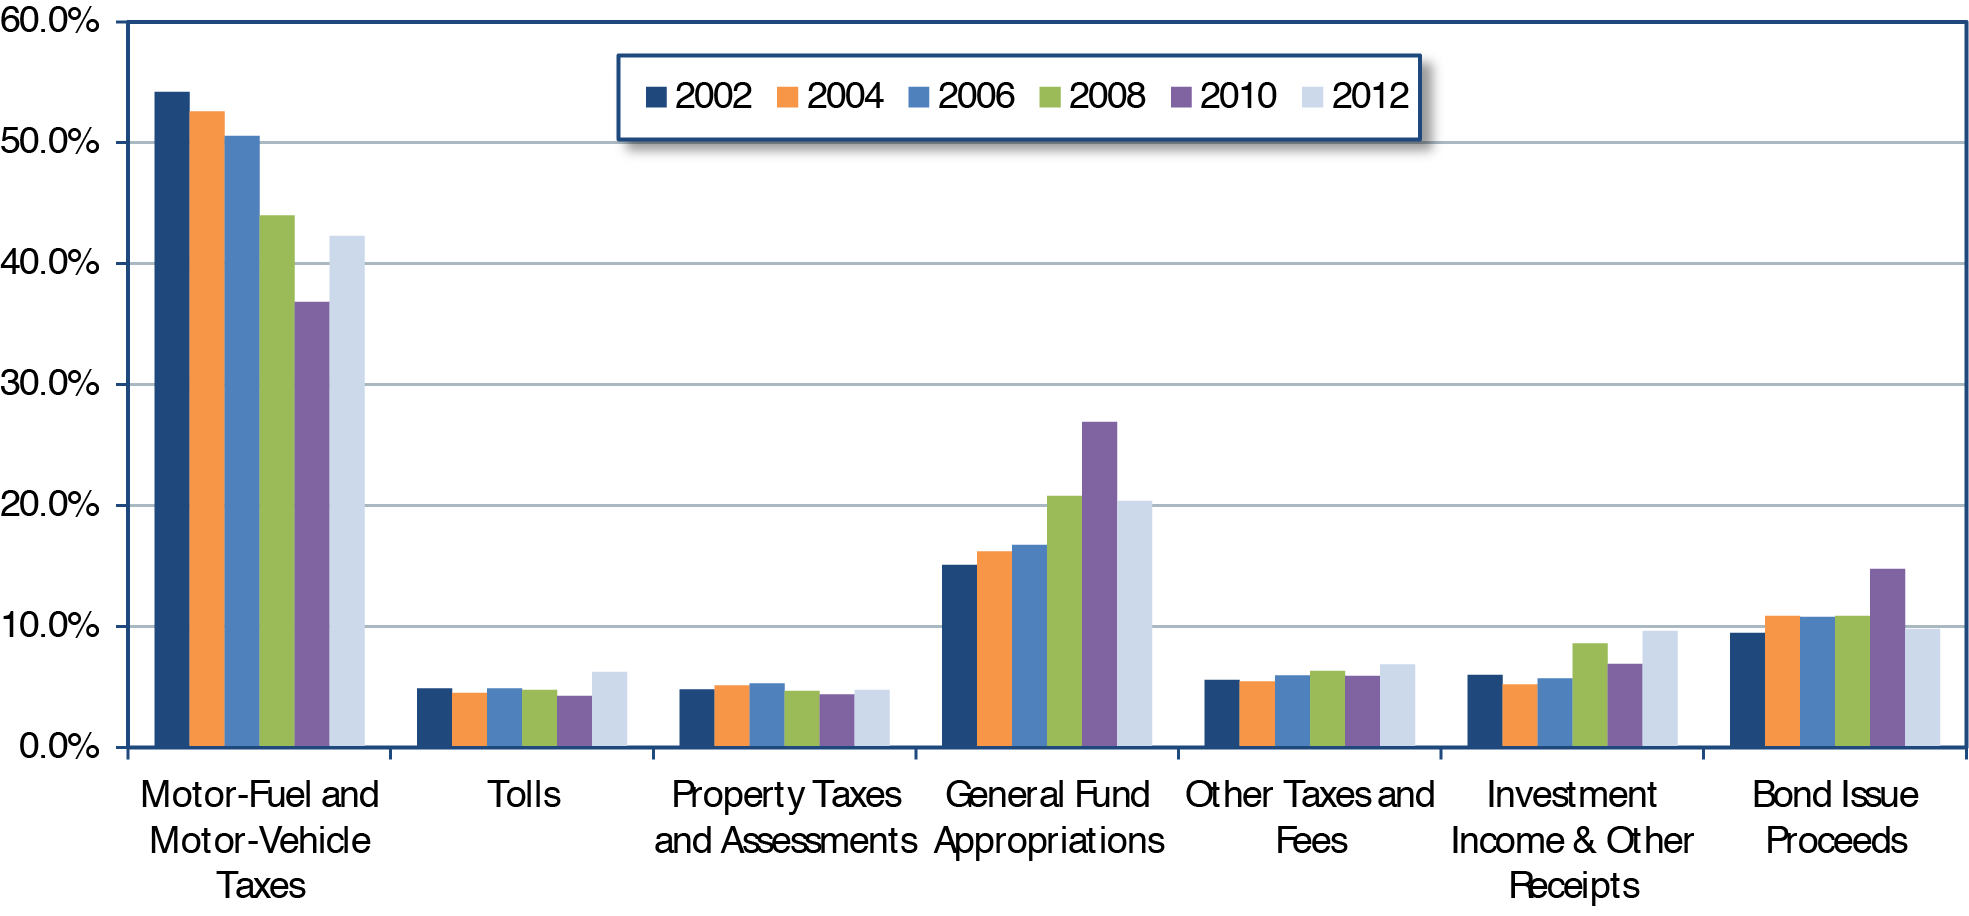 Bar chart plots shows the percent change in revenue in seven categories for the years 2002 through 2012. The trend for the category motor-fuel and motor-vehicle taxes is steadily downward, from 54.2 percent in 2002 to 36.8 percent in 2010 and then increases to 42.3 in 2012. The trend for the category tolls starts at 4.9 percent in 2002, stays steady around that value through 2010, and increases to end at 6.2 percent in 2012. The trend for the category property taxes and assessments starts at 4.8 percent in 2002, shows a slight increase to 5.3 percent in 2006, and trails off to 4.8 percent in 2012. The trend for the category general fund appropriations shows a steady increase from 15.1 percent in 2002 to 20.8 percent in 2008, a steeper increase to 26.9 percent in 2010. and goes back down to end at 20.4 percent in 2012. The trend for the category other taxes and fees starts at 5.6 percent in 2002, shows a slight increase to 6.3 percent in 2008, with a decrease to 5.9 percent in 2010, and ends at 6.9 percent in 2012. The trend for the category investment income and other receipts shows an increase from 6.0 percent in 2002, decreases slightly in 2004 and 2006, increases 8.6 percent in 2008, with a decrease to 6.9 percent in 2010, and an increase to its peak at 9.6 percent in 2012. The trend for the category bond issue proceeds shows a slight increase from 9.5 percent in 2002 to 10.9 percent in 2008, a steeper increase to 14.8 percent in 2010, and decreases to end at 9.8 percent in 2012. <em>Sources: Highway Statistics, various years, Tables HF-10A and HF-10.